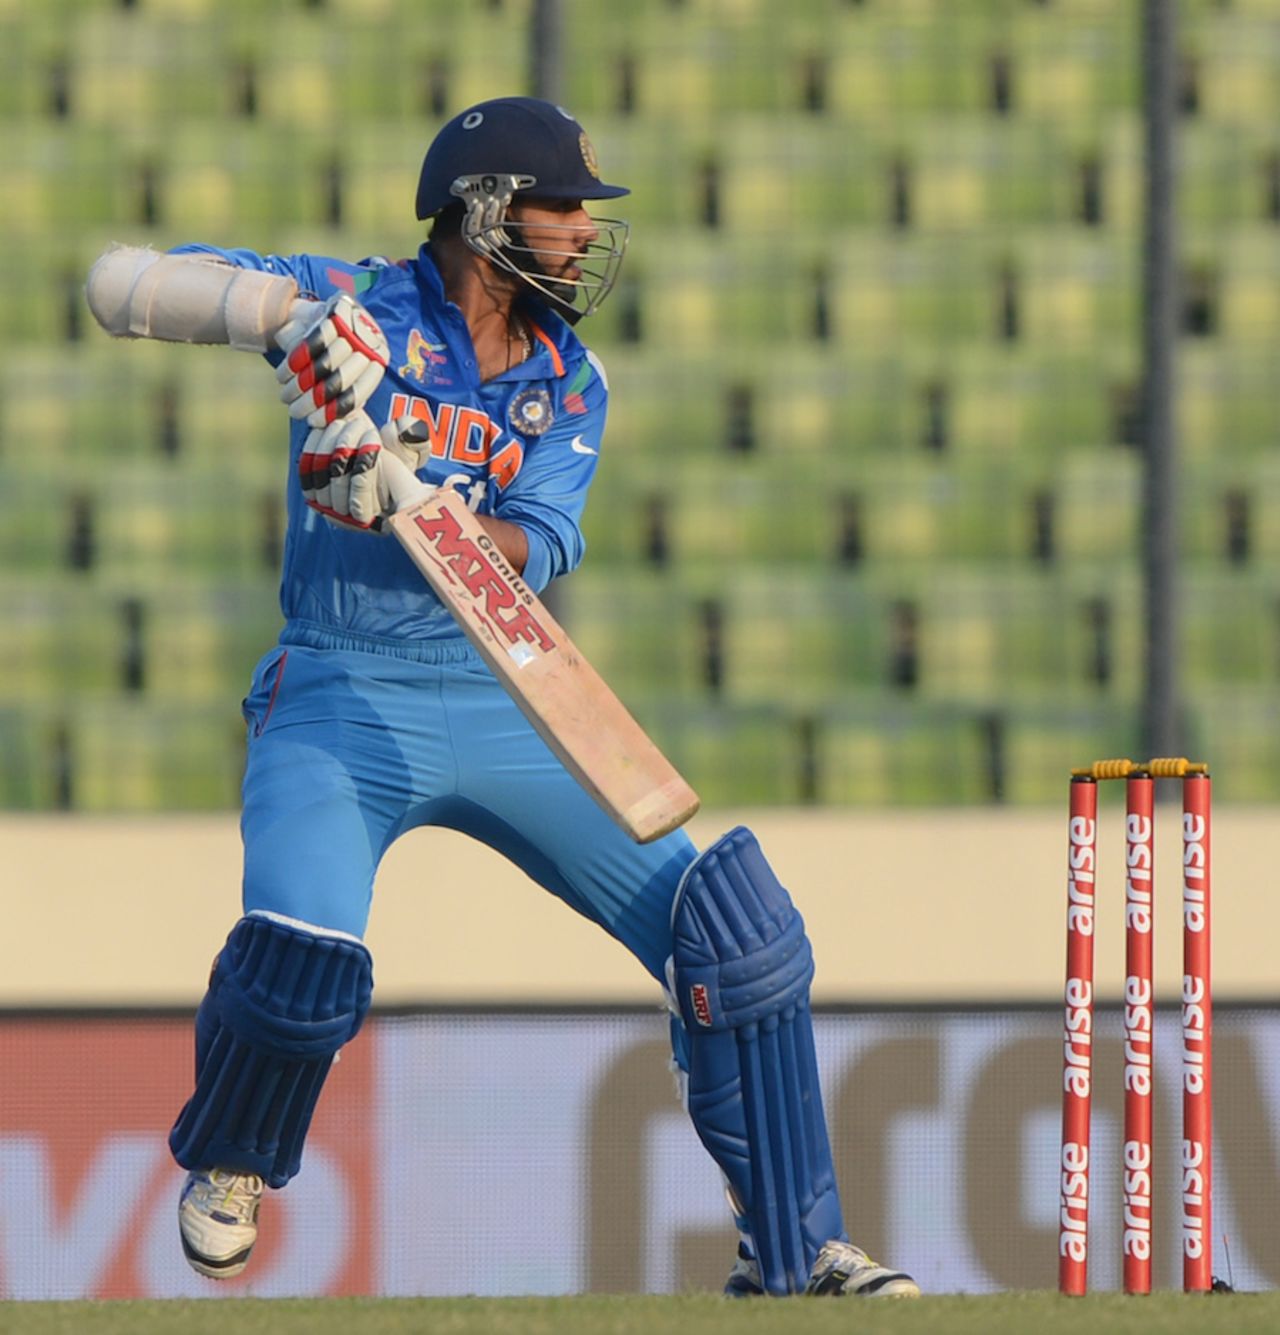 Shikhar Dhawan cuts one late, Afghanistan v India, Asia Cup, Mirpur, March 5, 2014